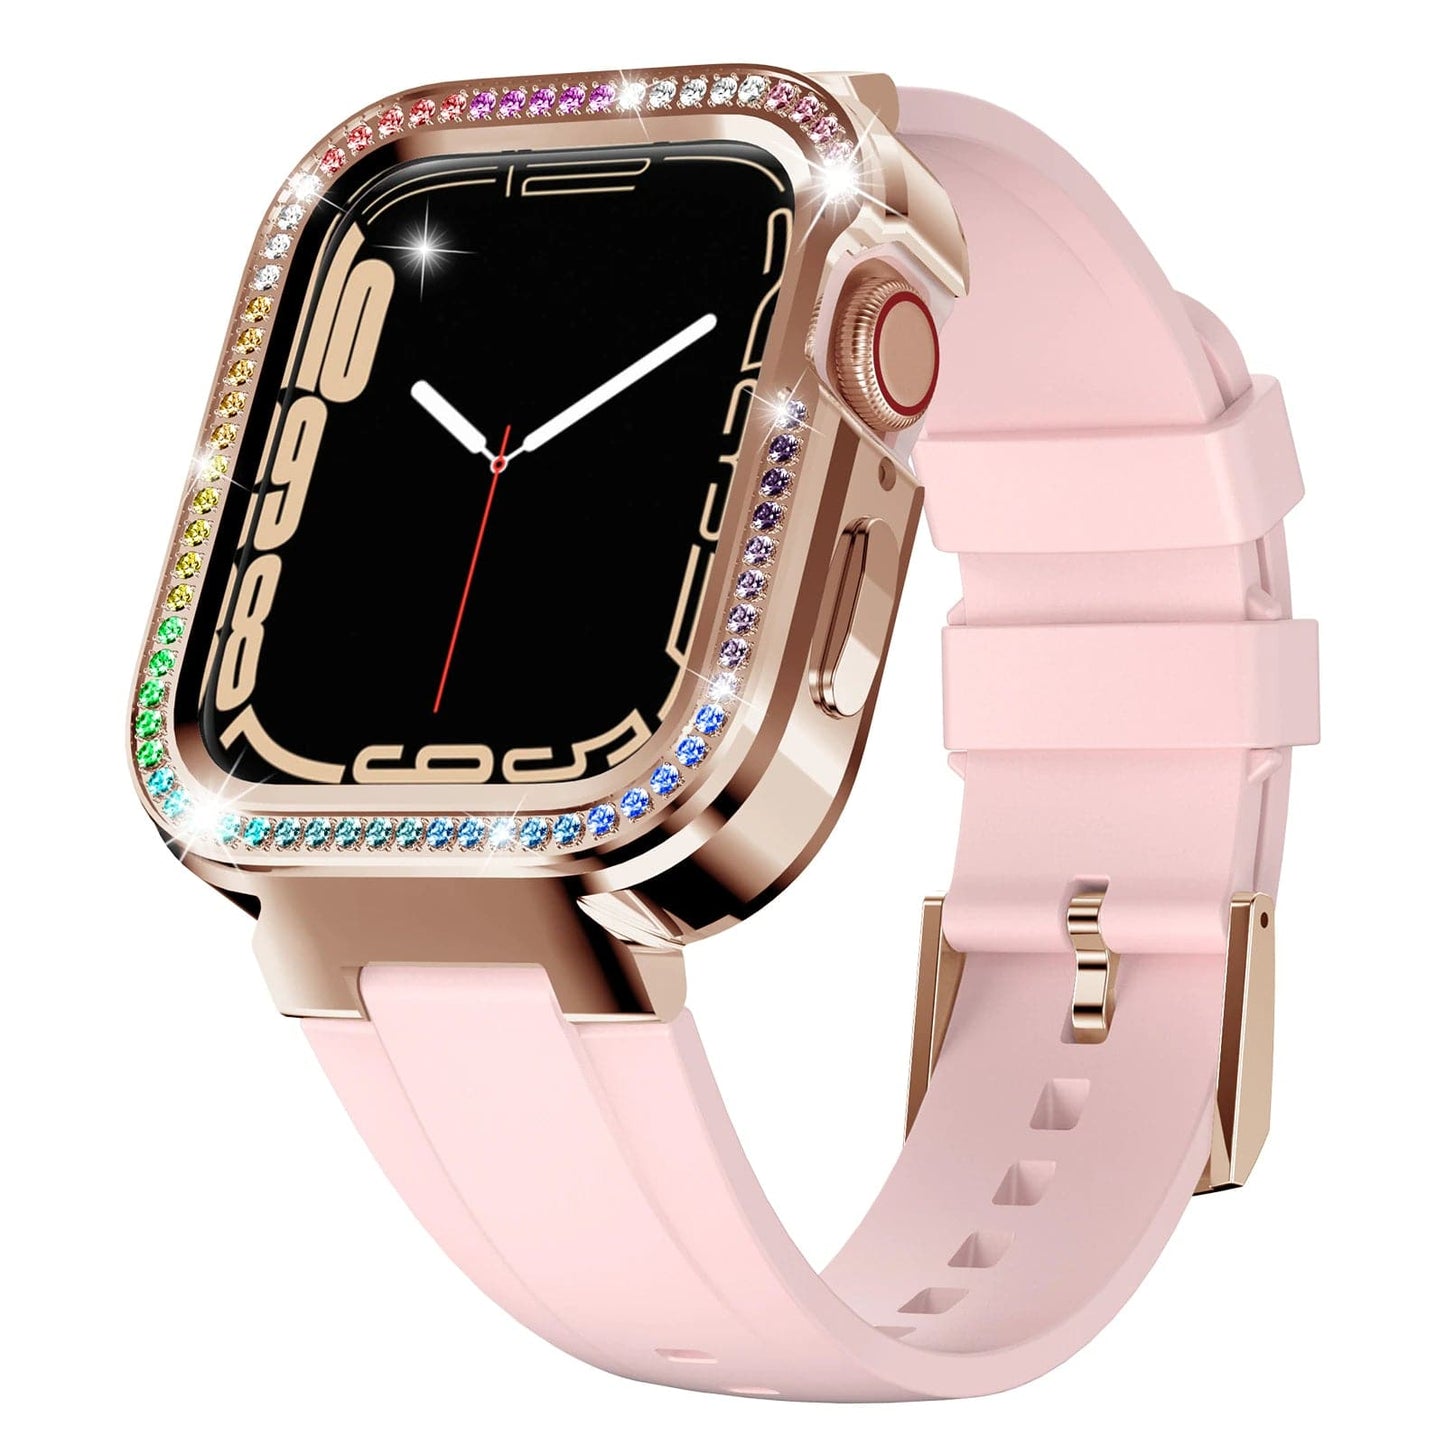 Casey Apple Watch Modification Kit For Women Scrunchapples 40mm Pink With Color Diamonds 